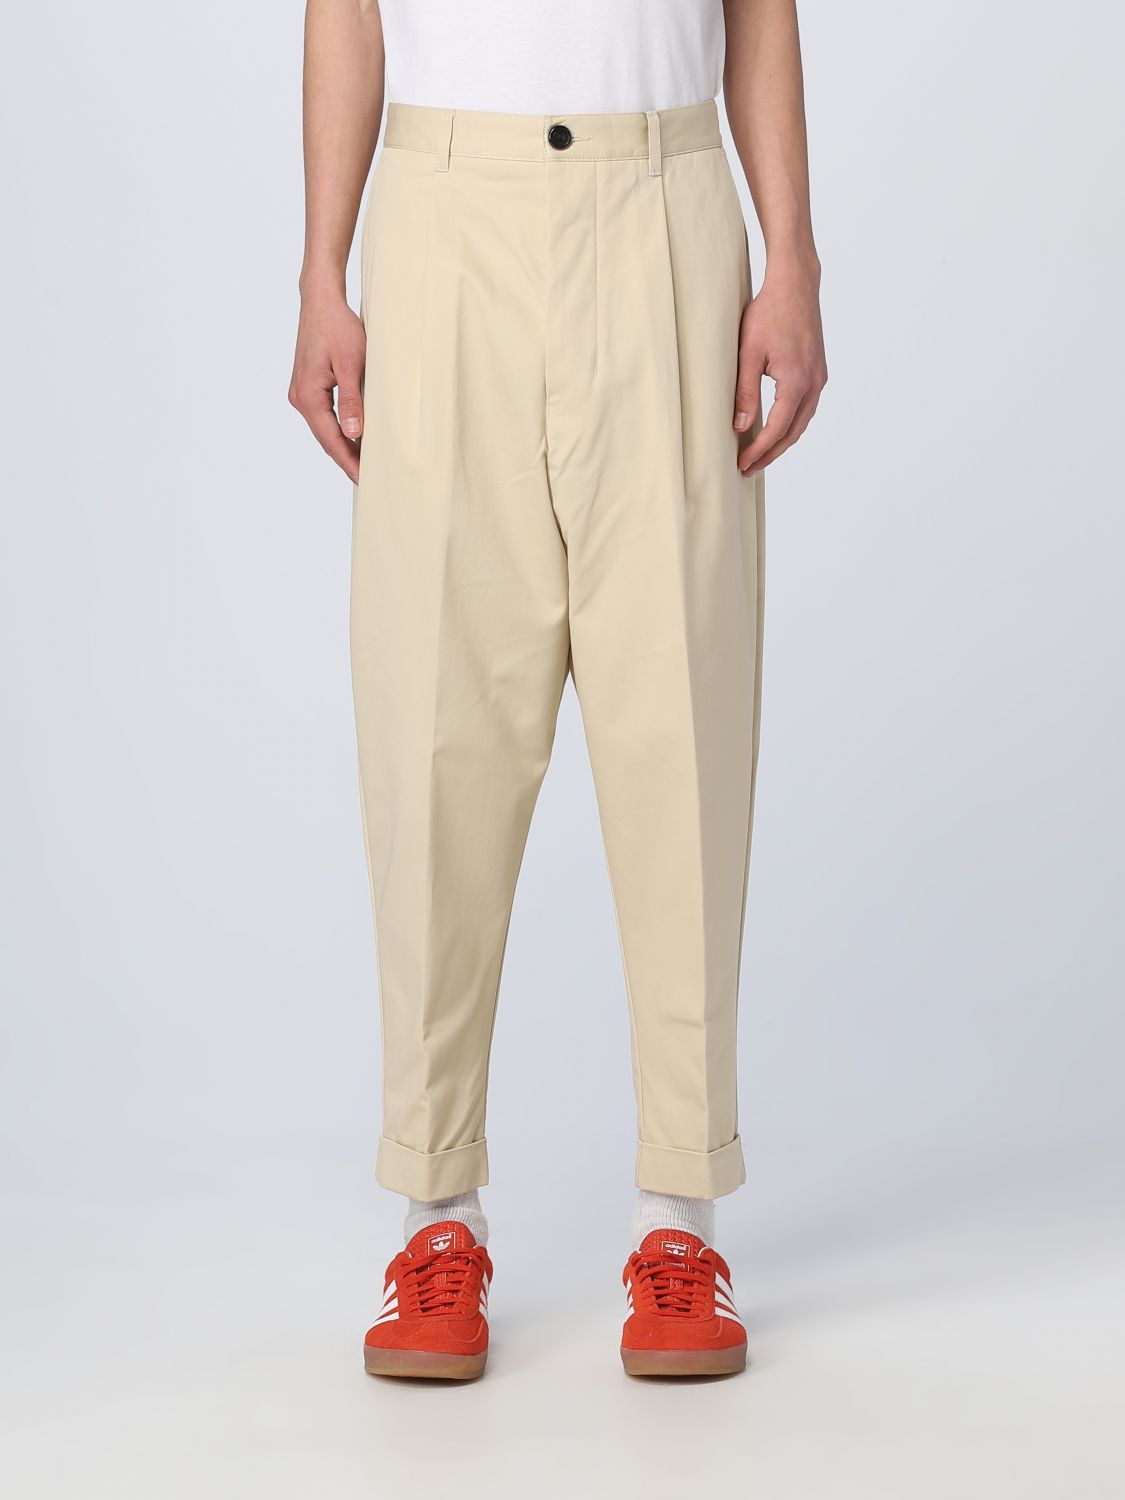 Grey Oversized Carrot Fit Chino Trousers | AMI PARIS US